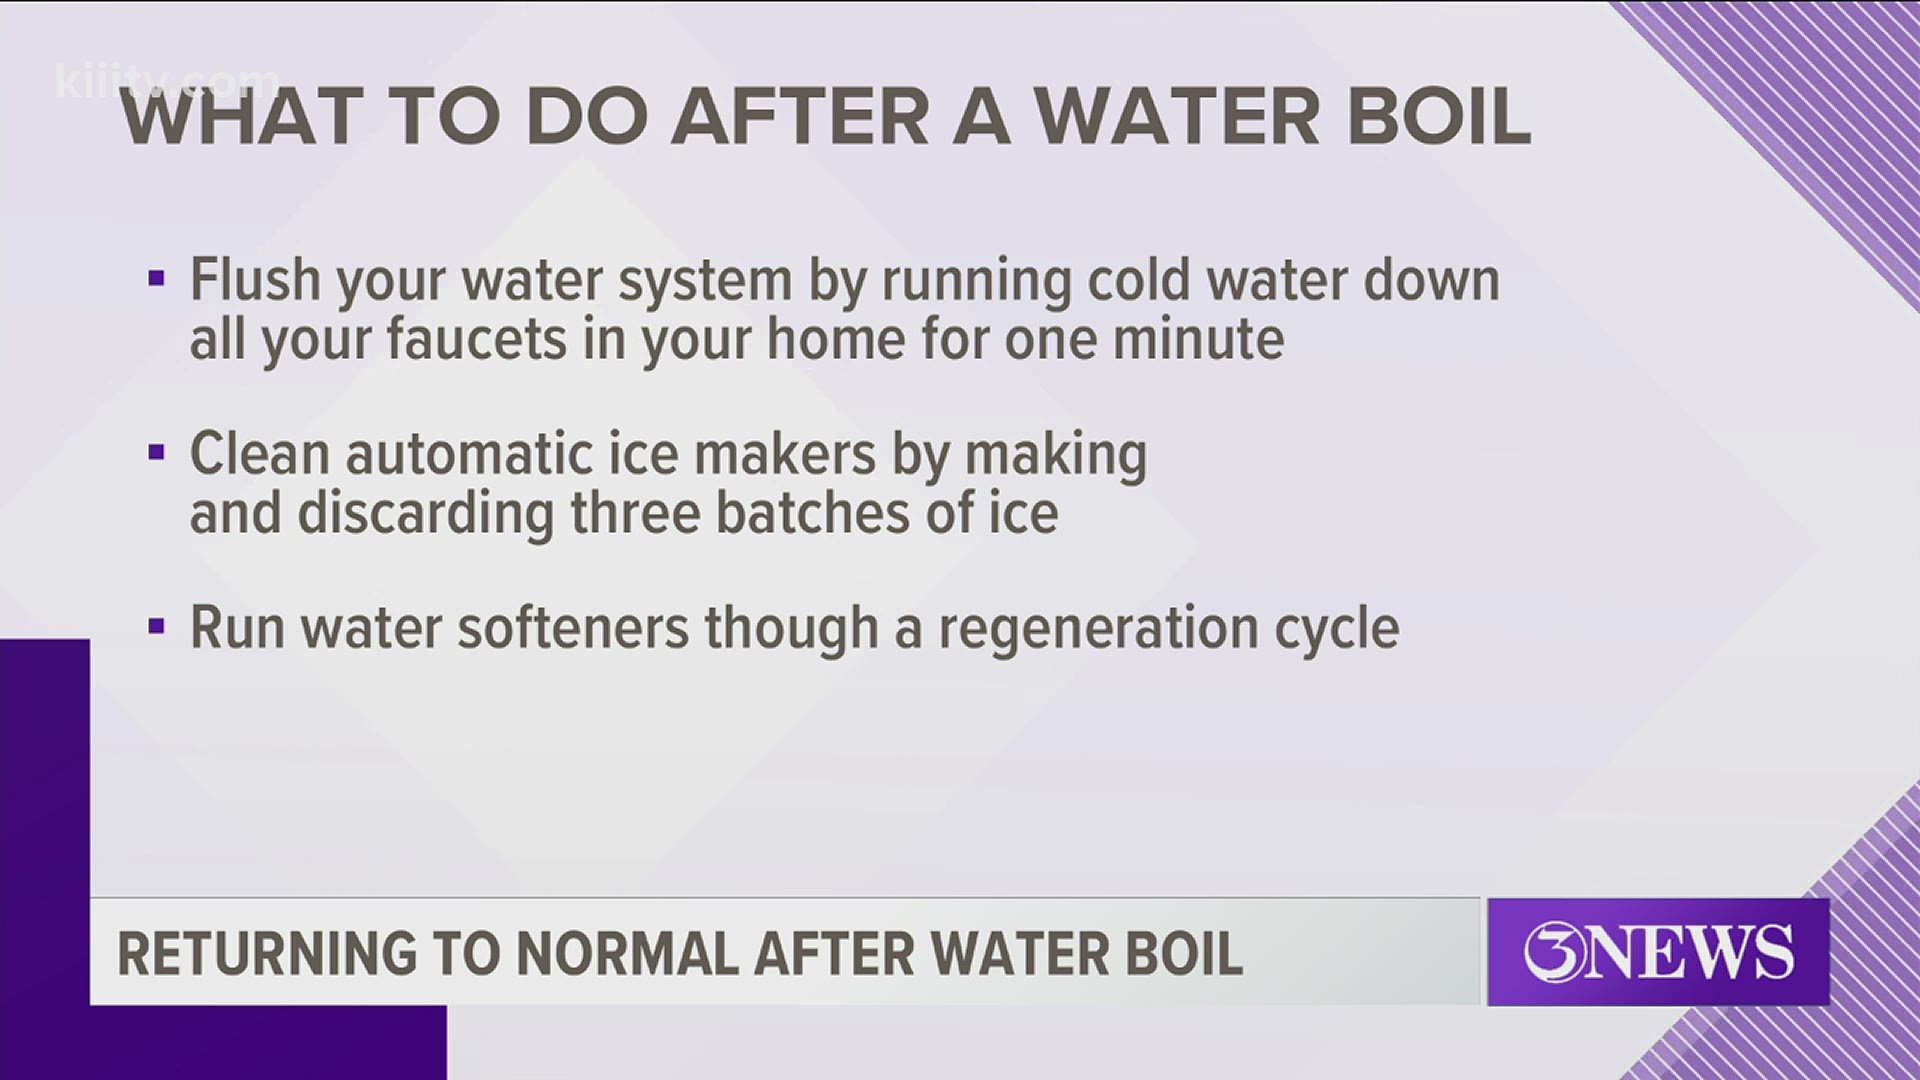 Here are the steps to take after a water boil order.